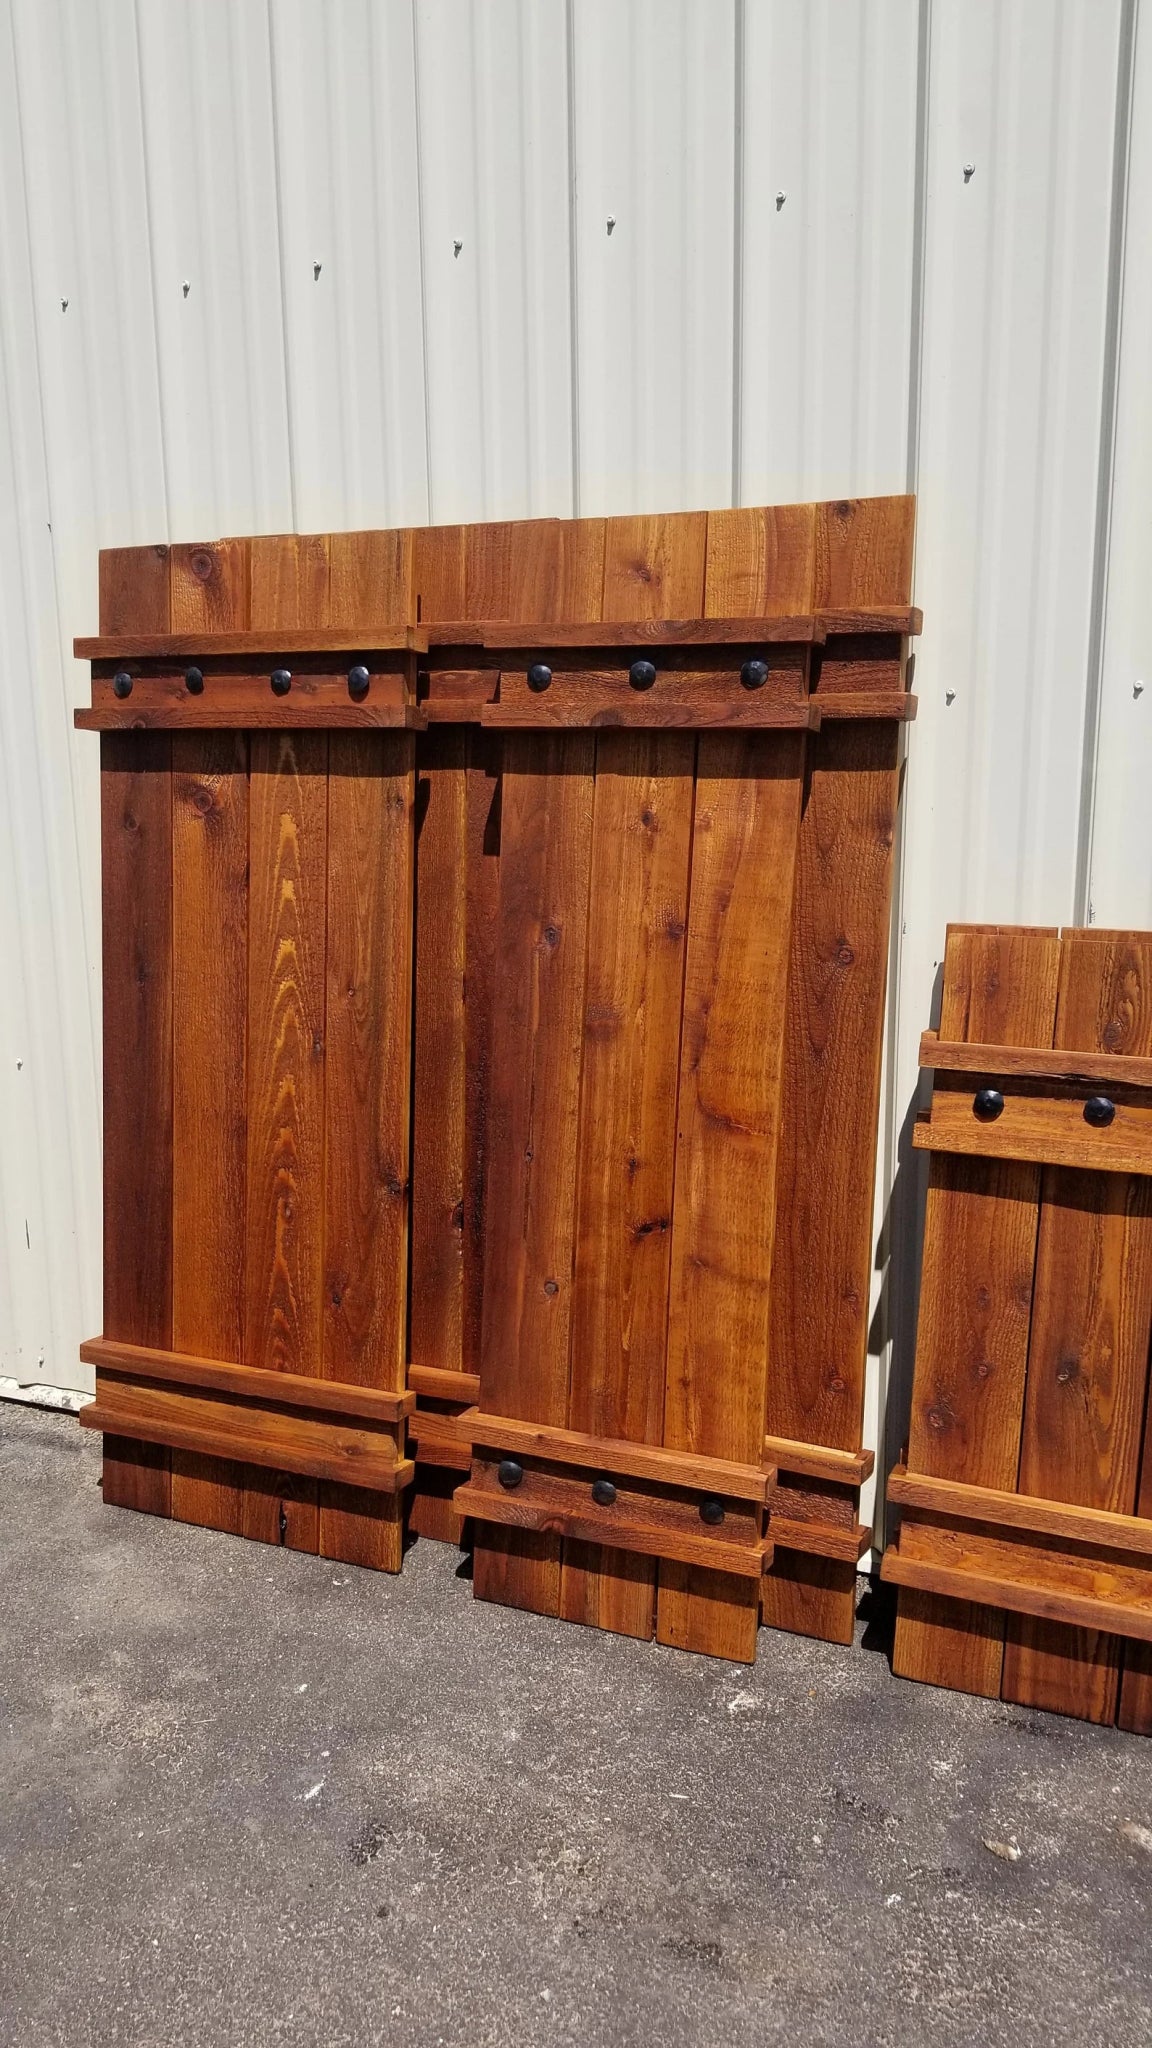 Three cedar wood shutters with handles and hinges